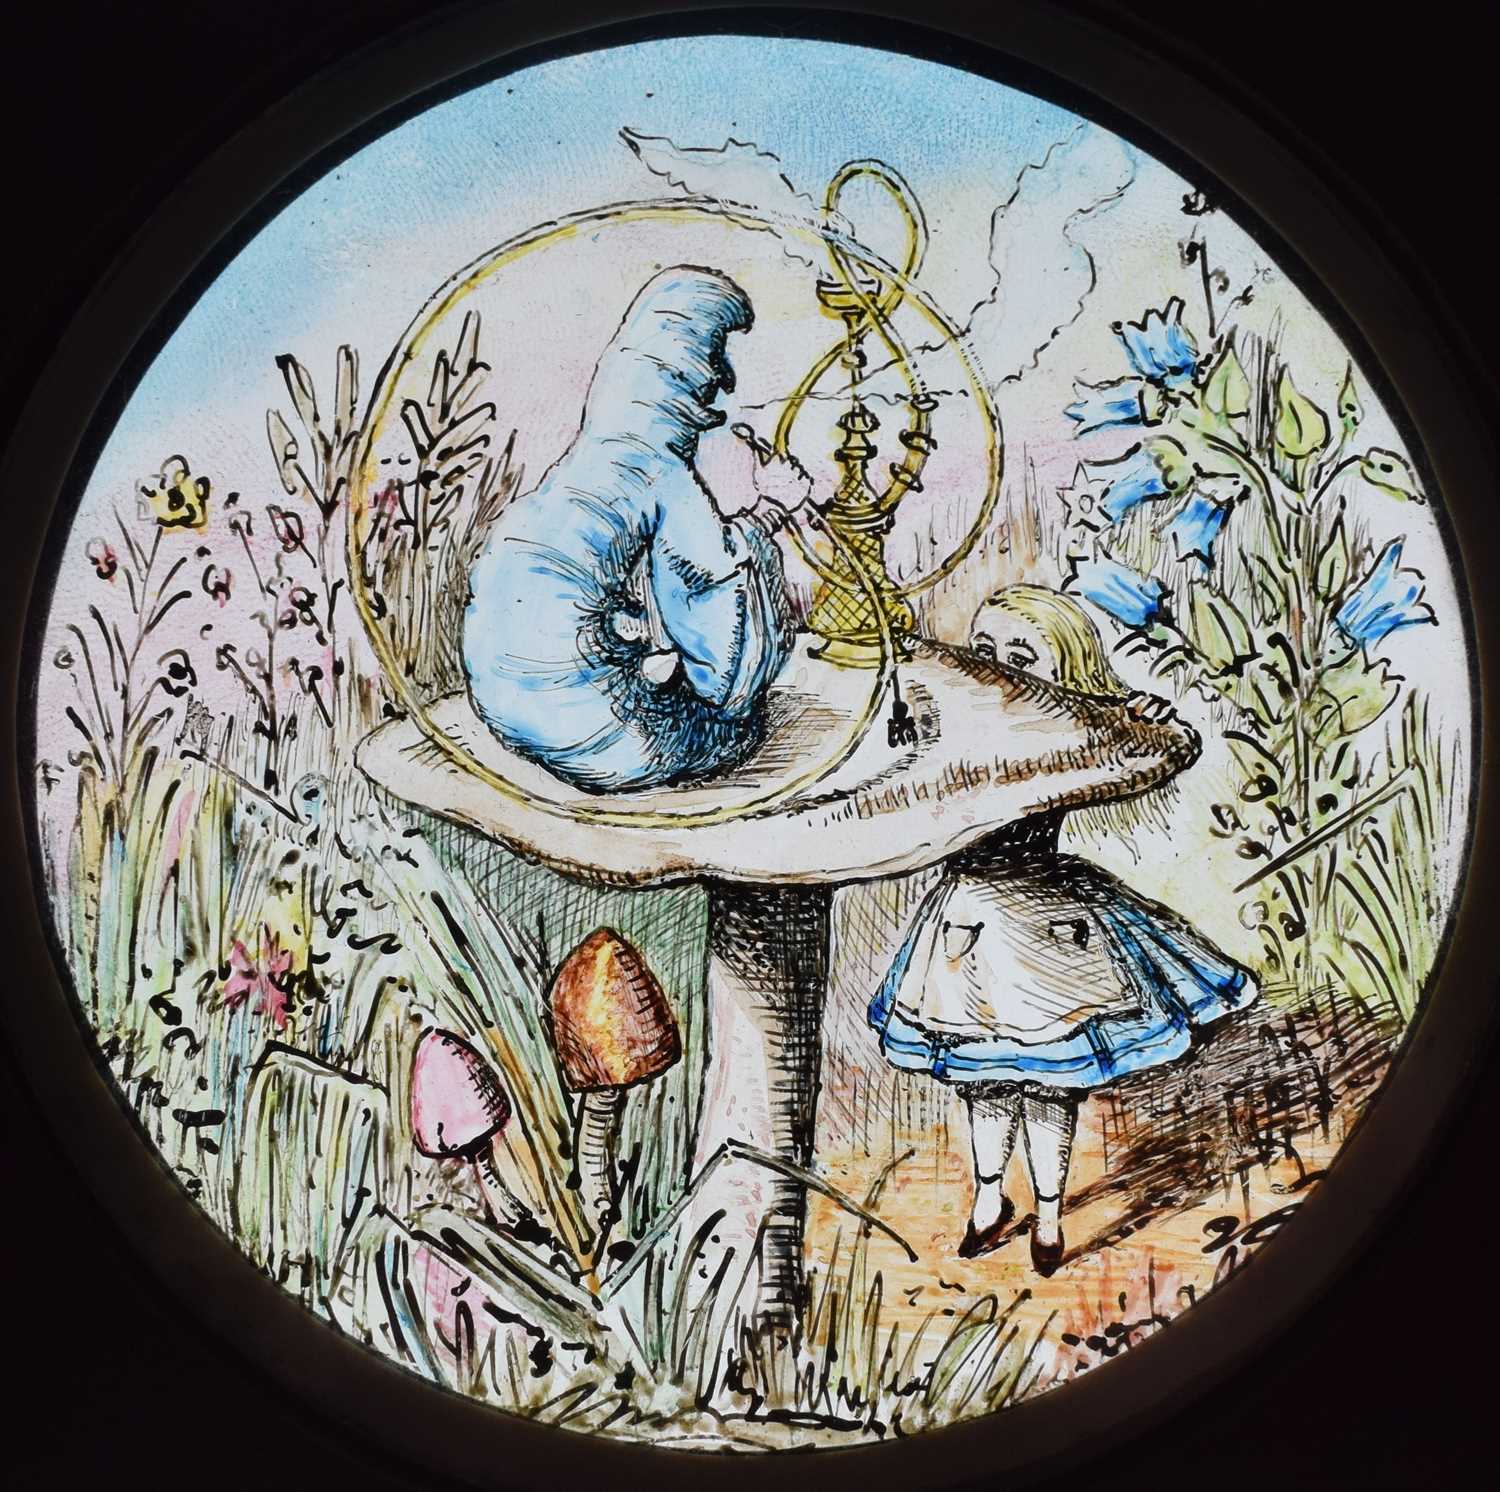 Magic Lantern Slides, Hand painted. Alice's Adventures in Wonderland & Through the Looking Glass. A - Image 24 of 48